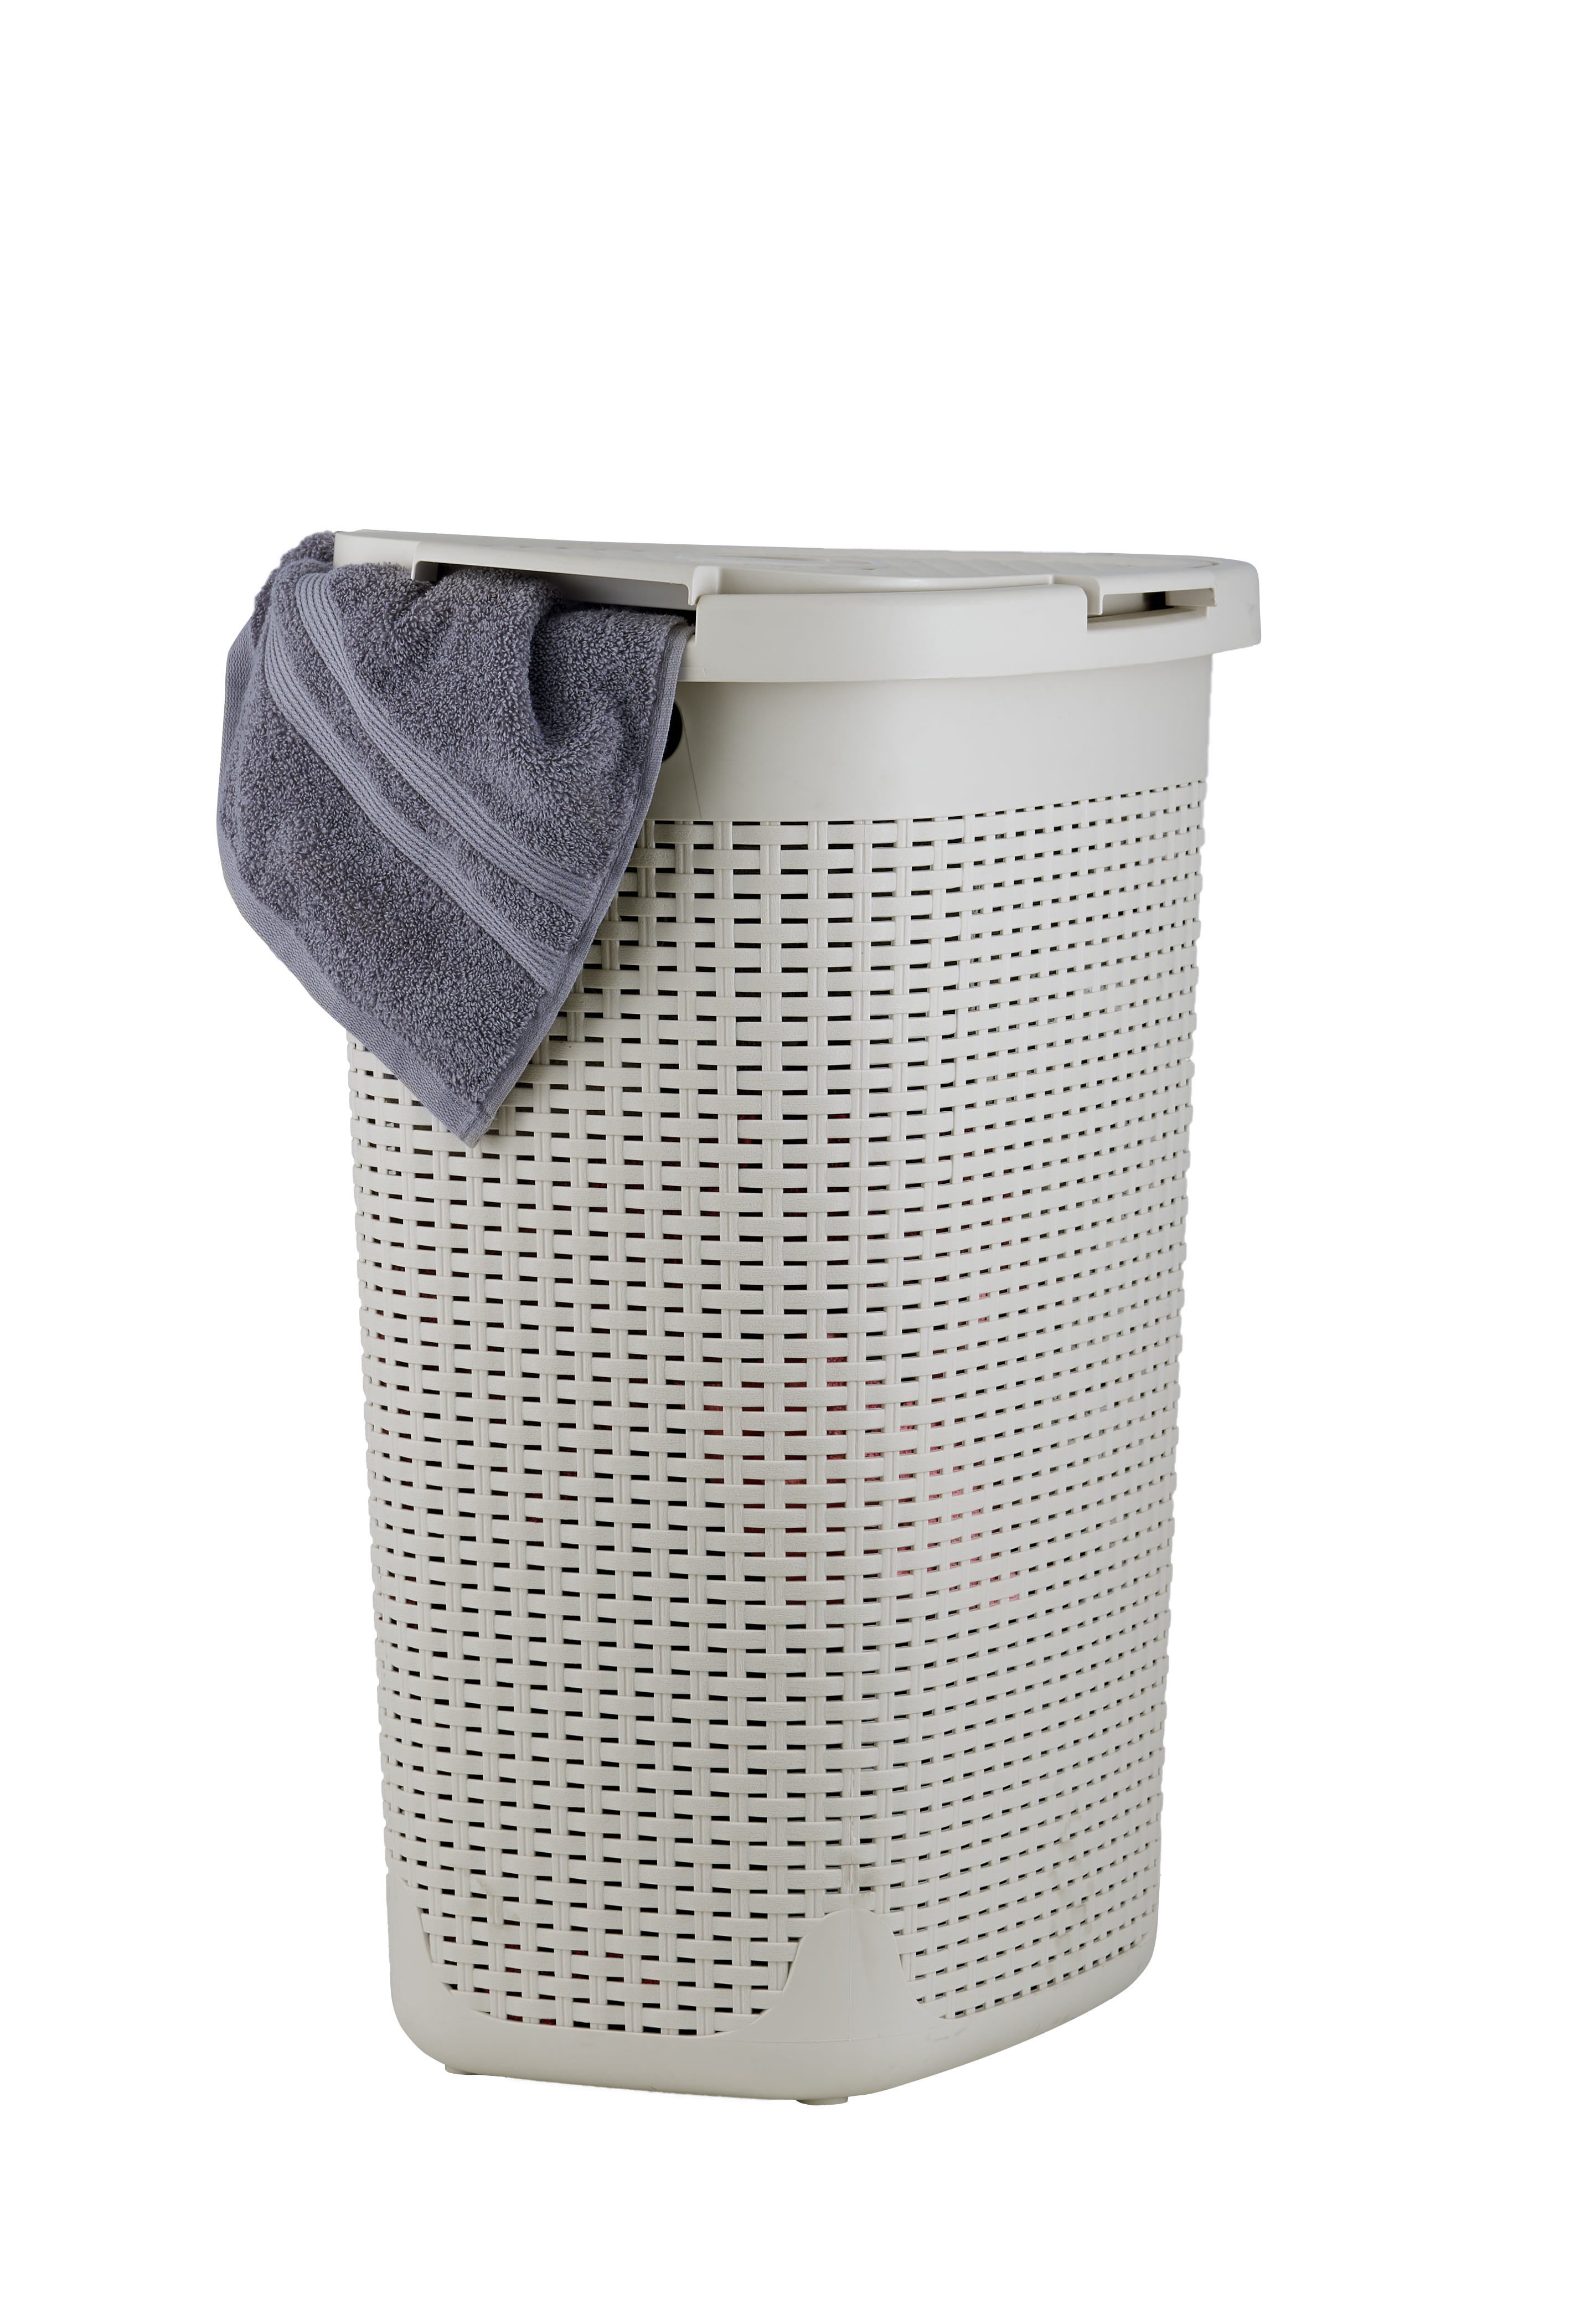 Grey Laundry Basket Rattan Weave Washing Clothes Plastic Storage Bin With Lid 